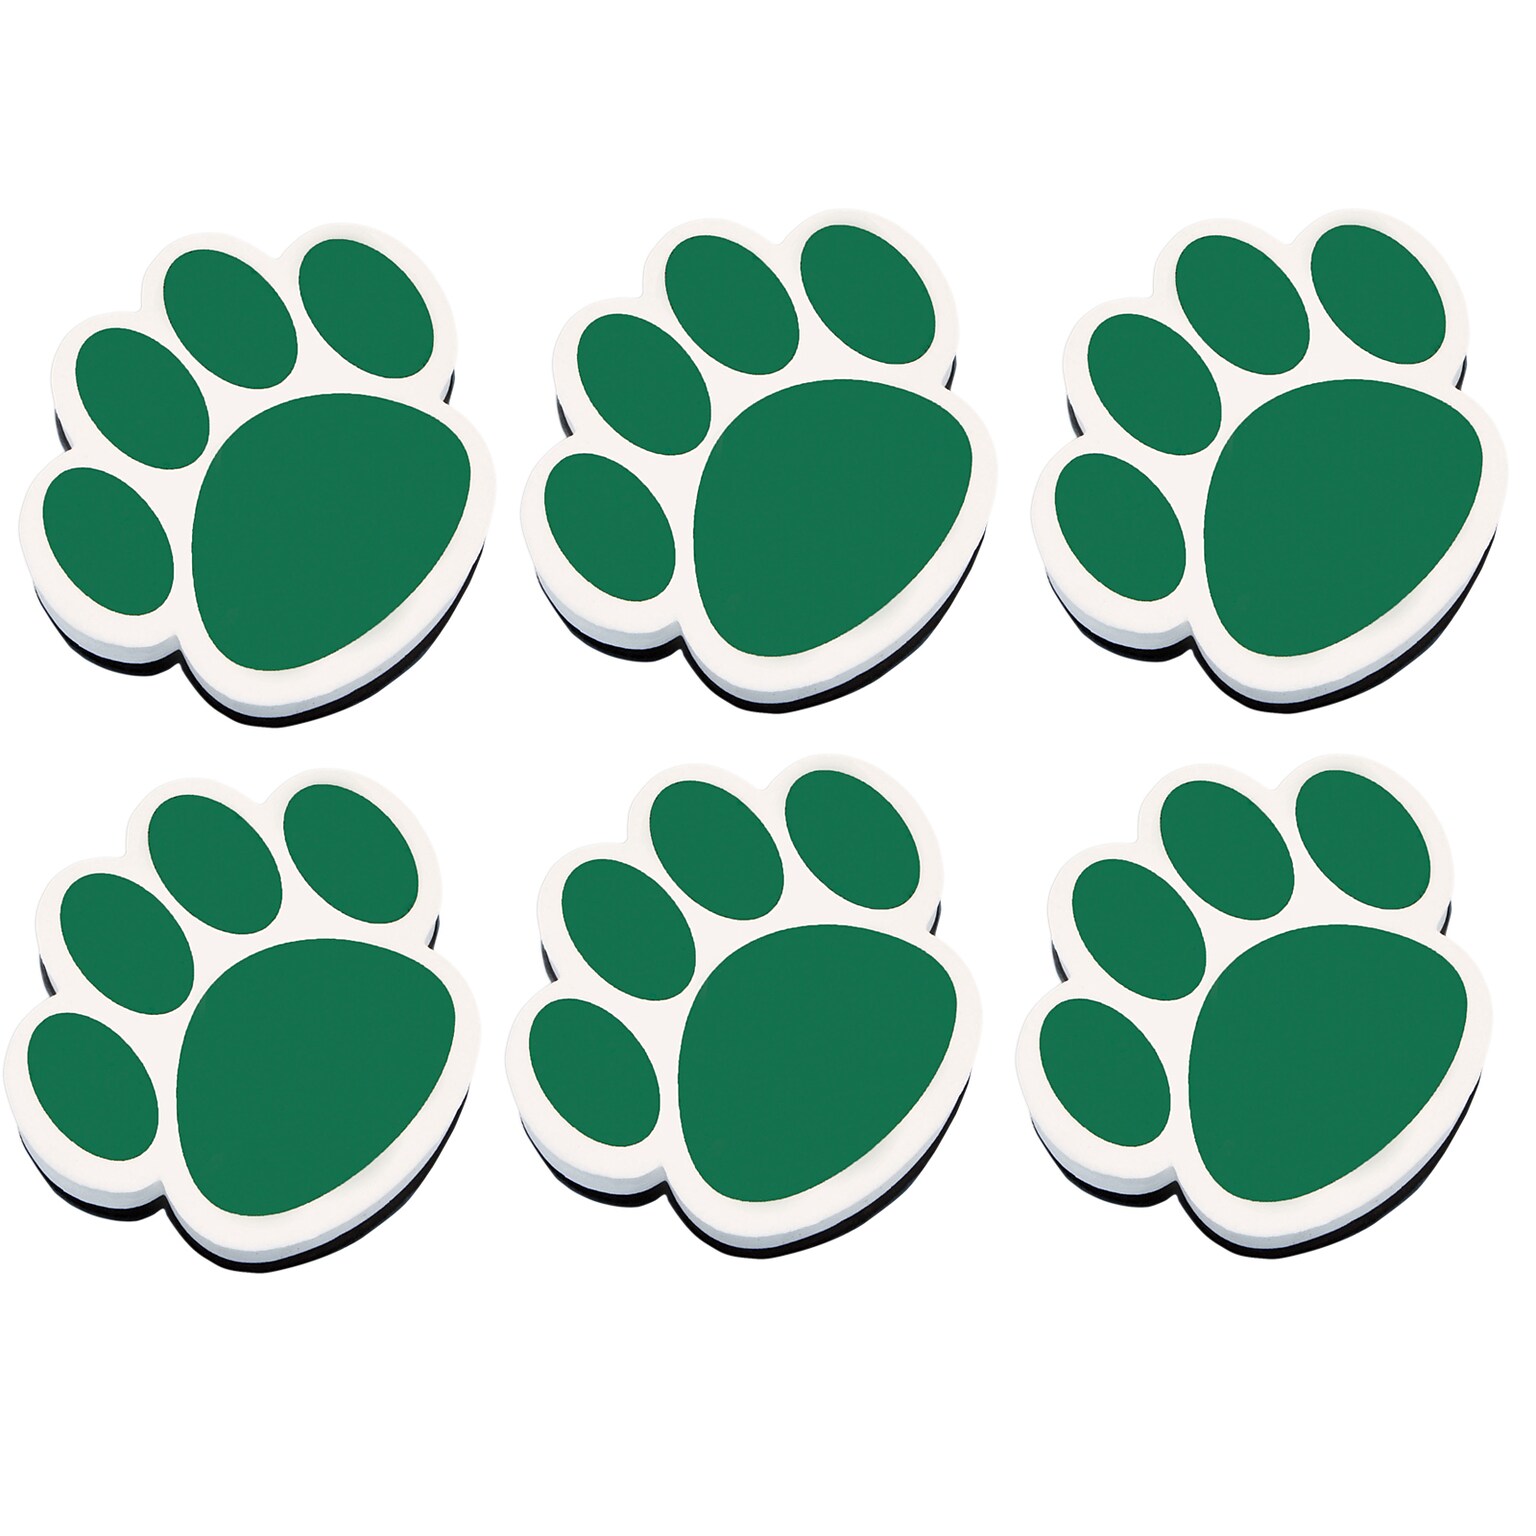 Ashley Productions® Dry Erase Magnetic Whiteboard Erasers, Green Paw, Pack of 6 (ASH10001-6)